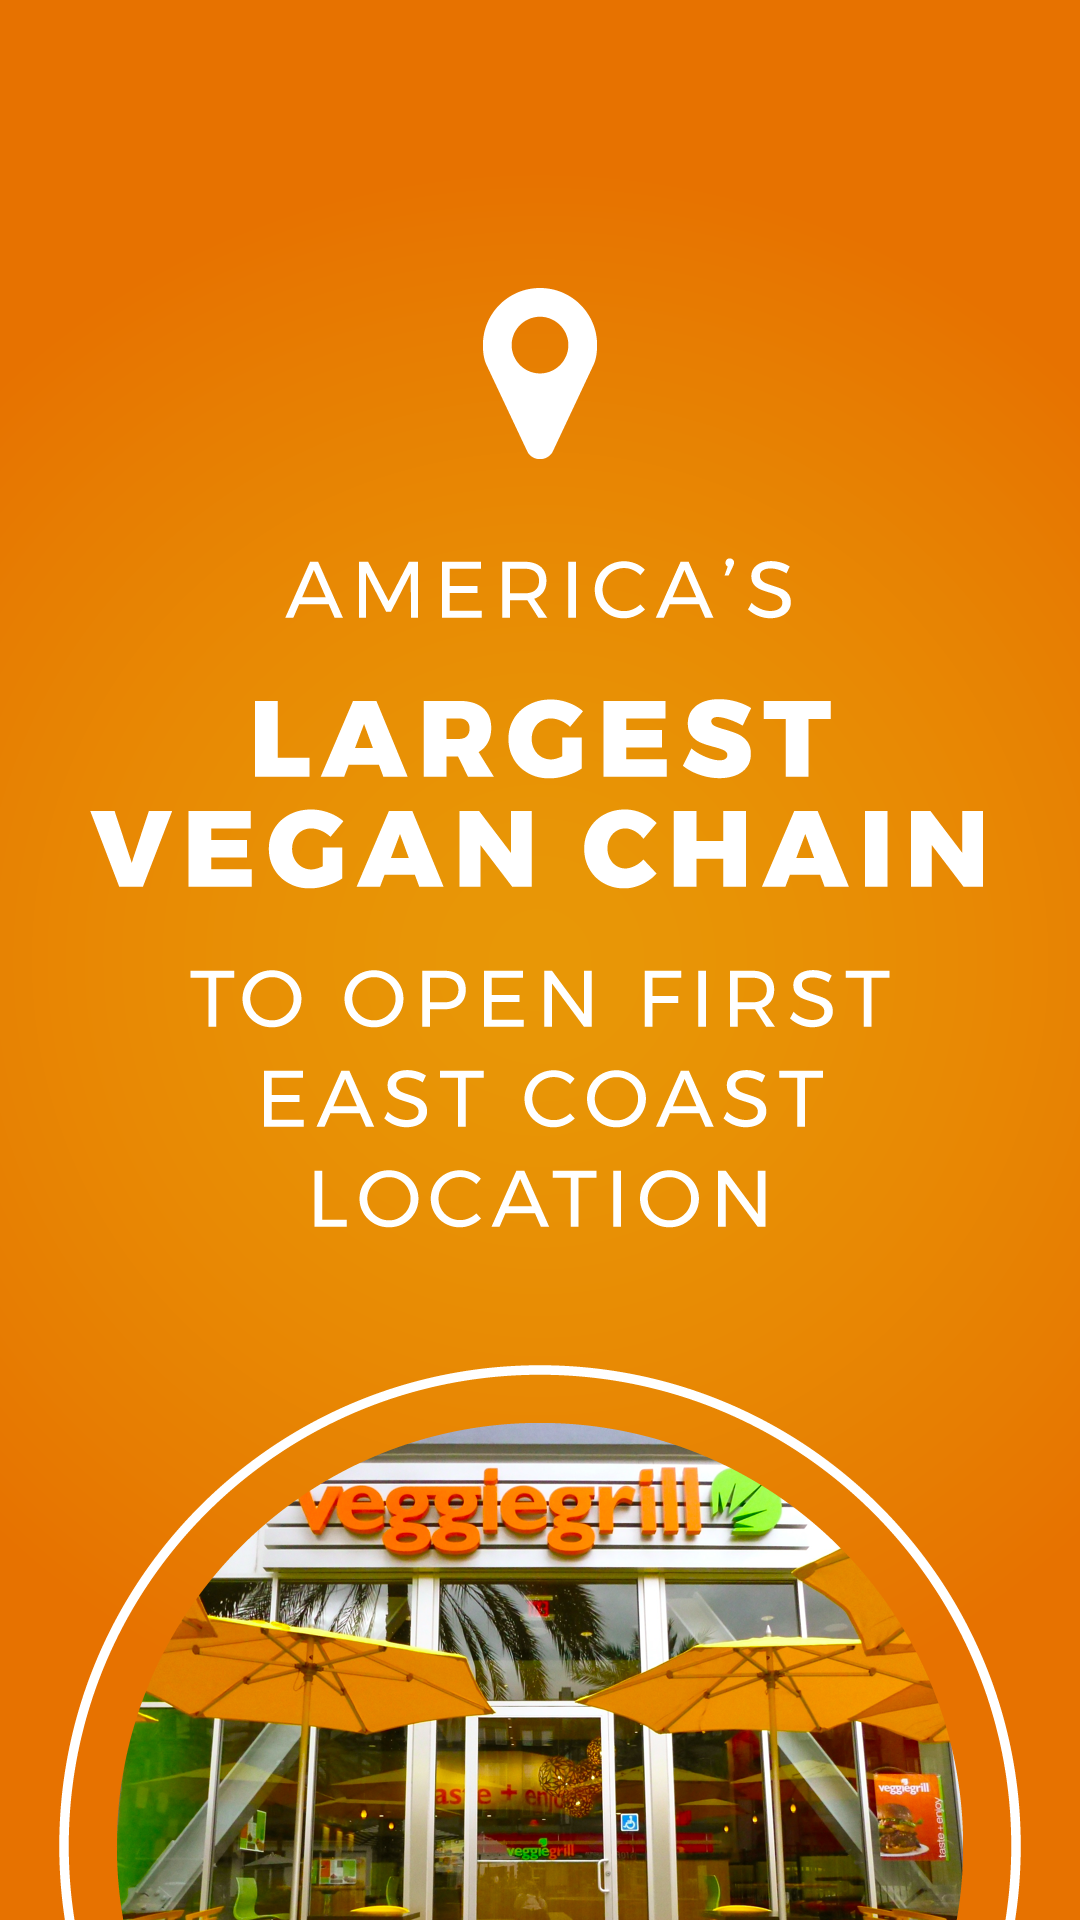 America’s Largest Vegan Chain to Open First East Coast Location